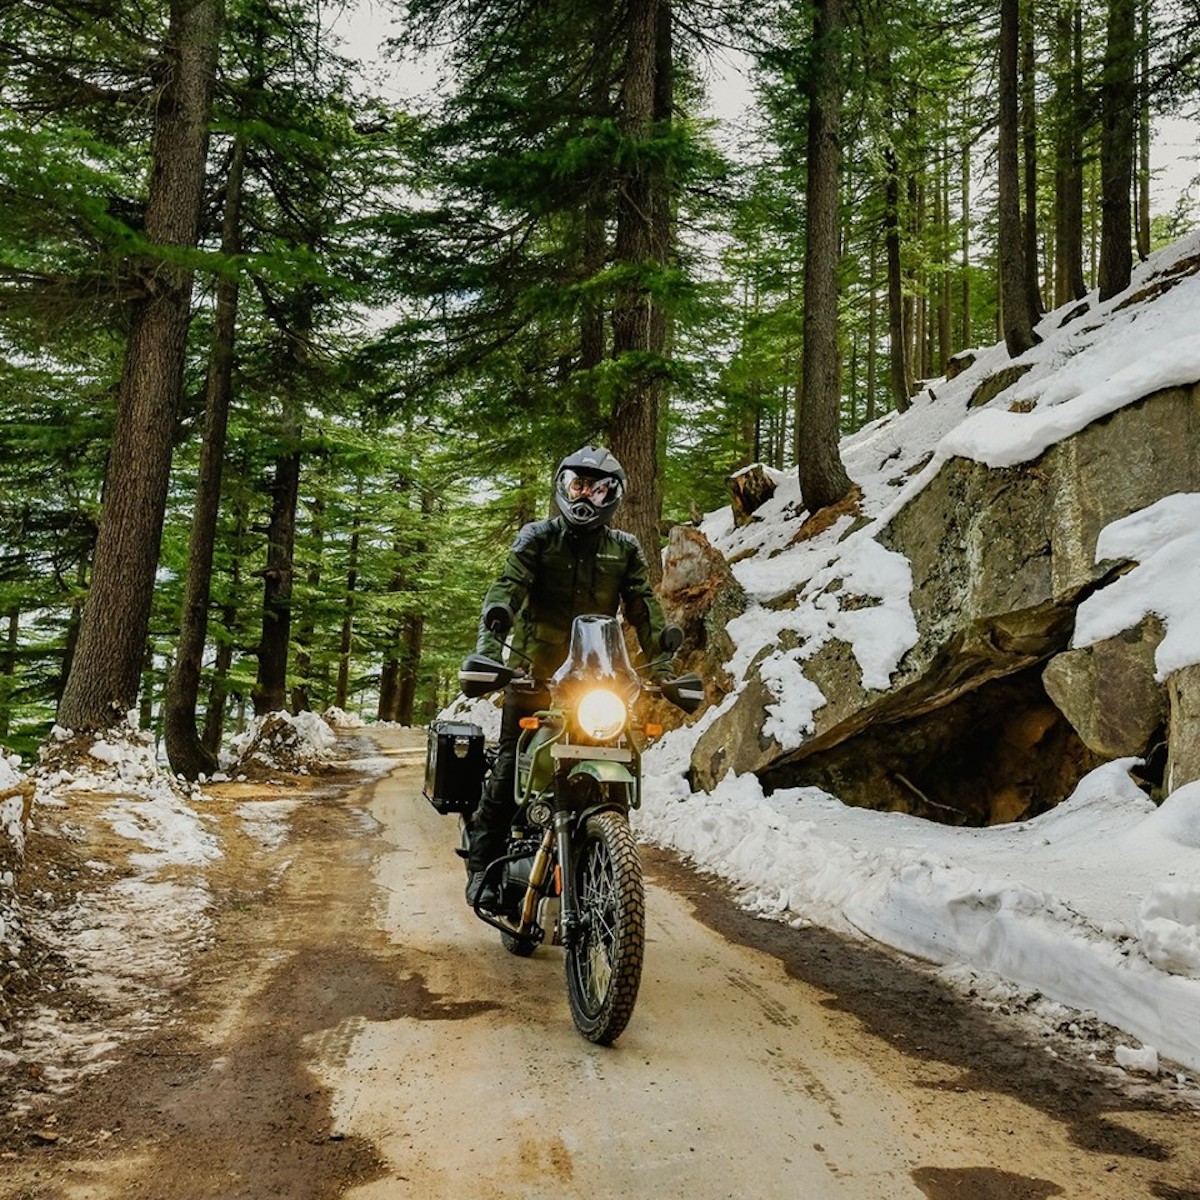 The 2021 Himalaya riding through the forest. This bike is one of the best beginner motorcycles.